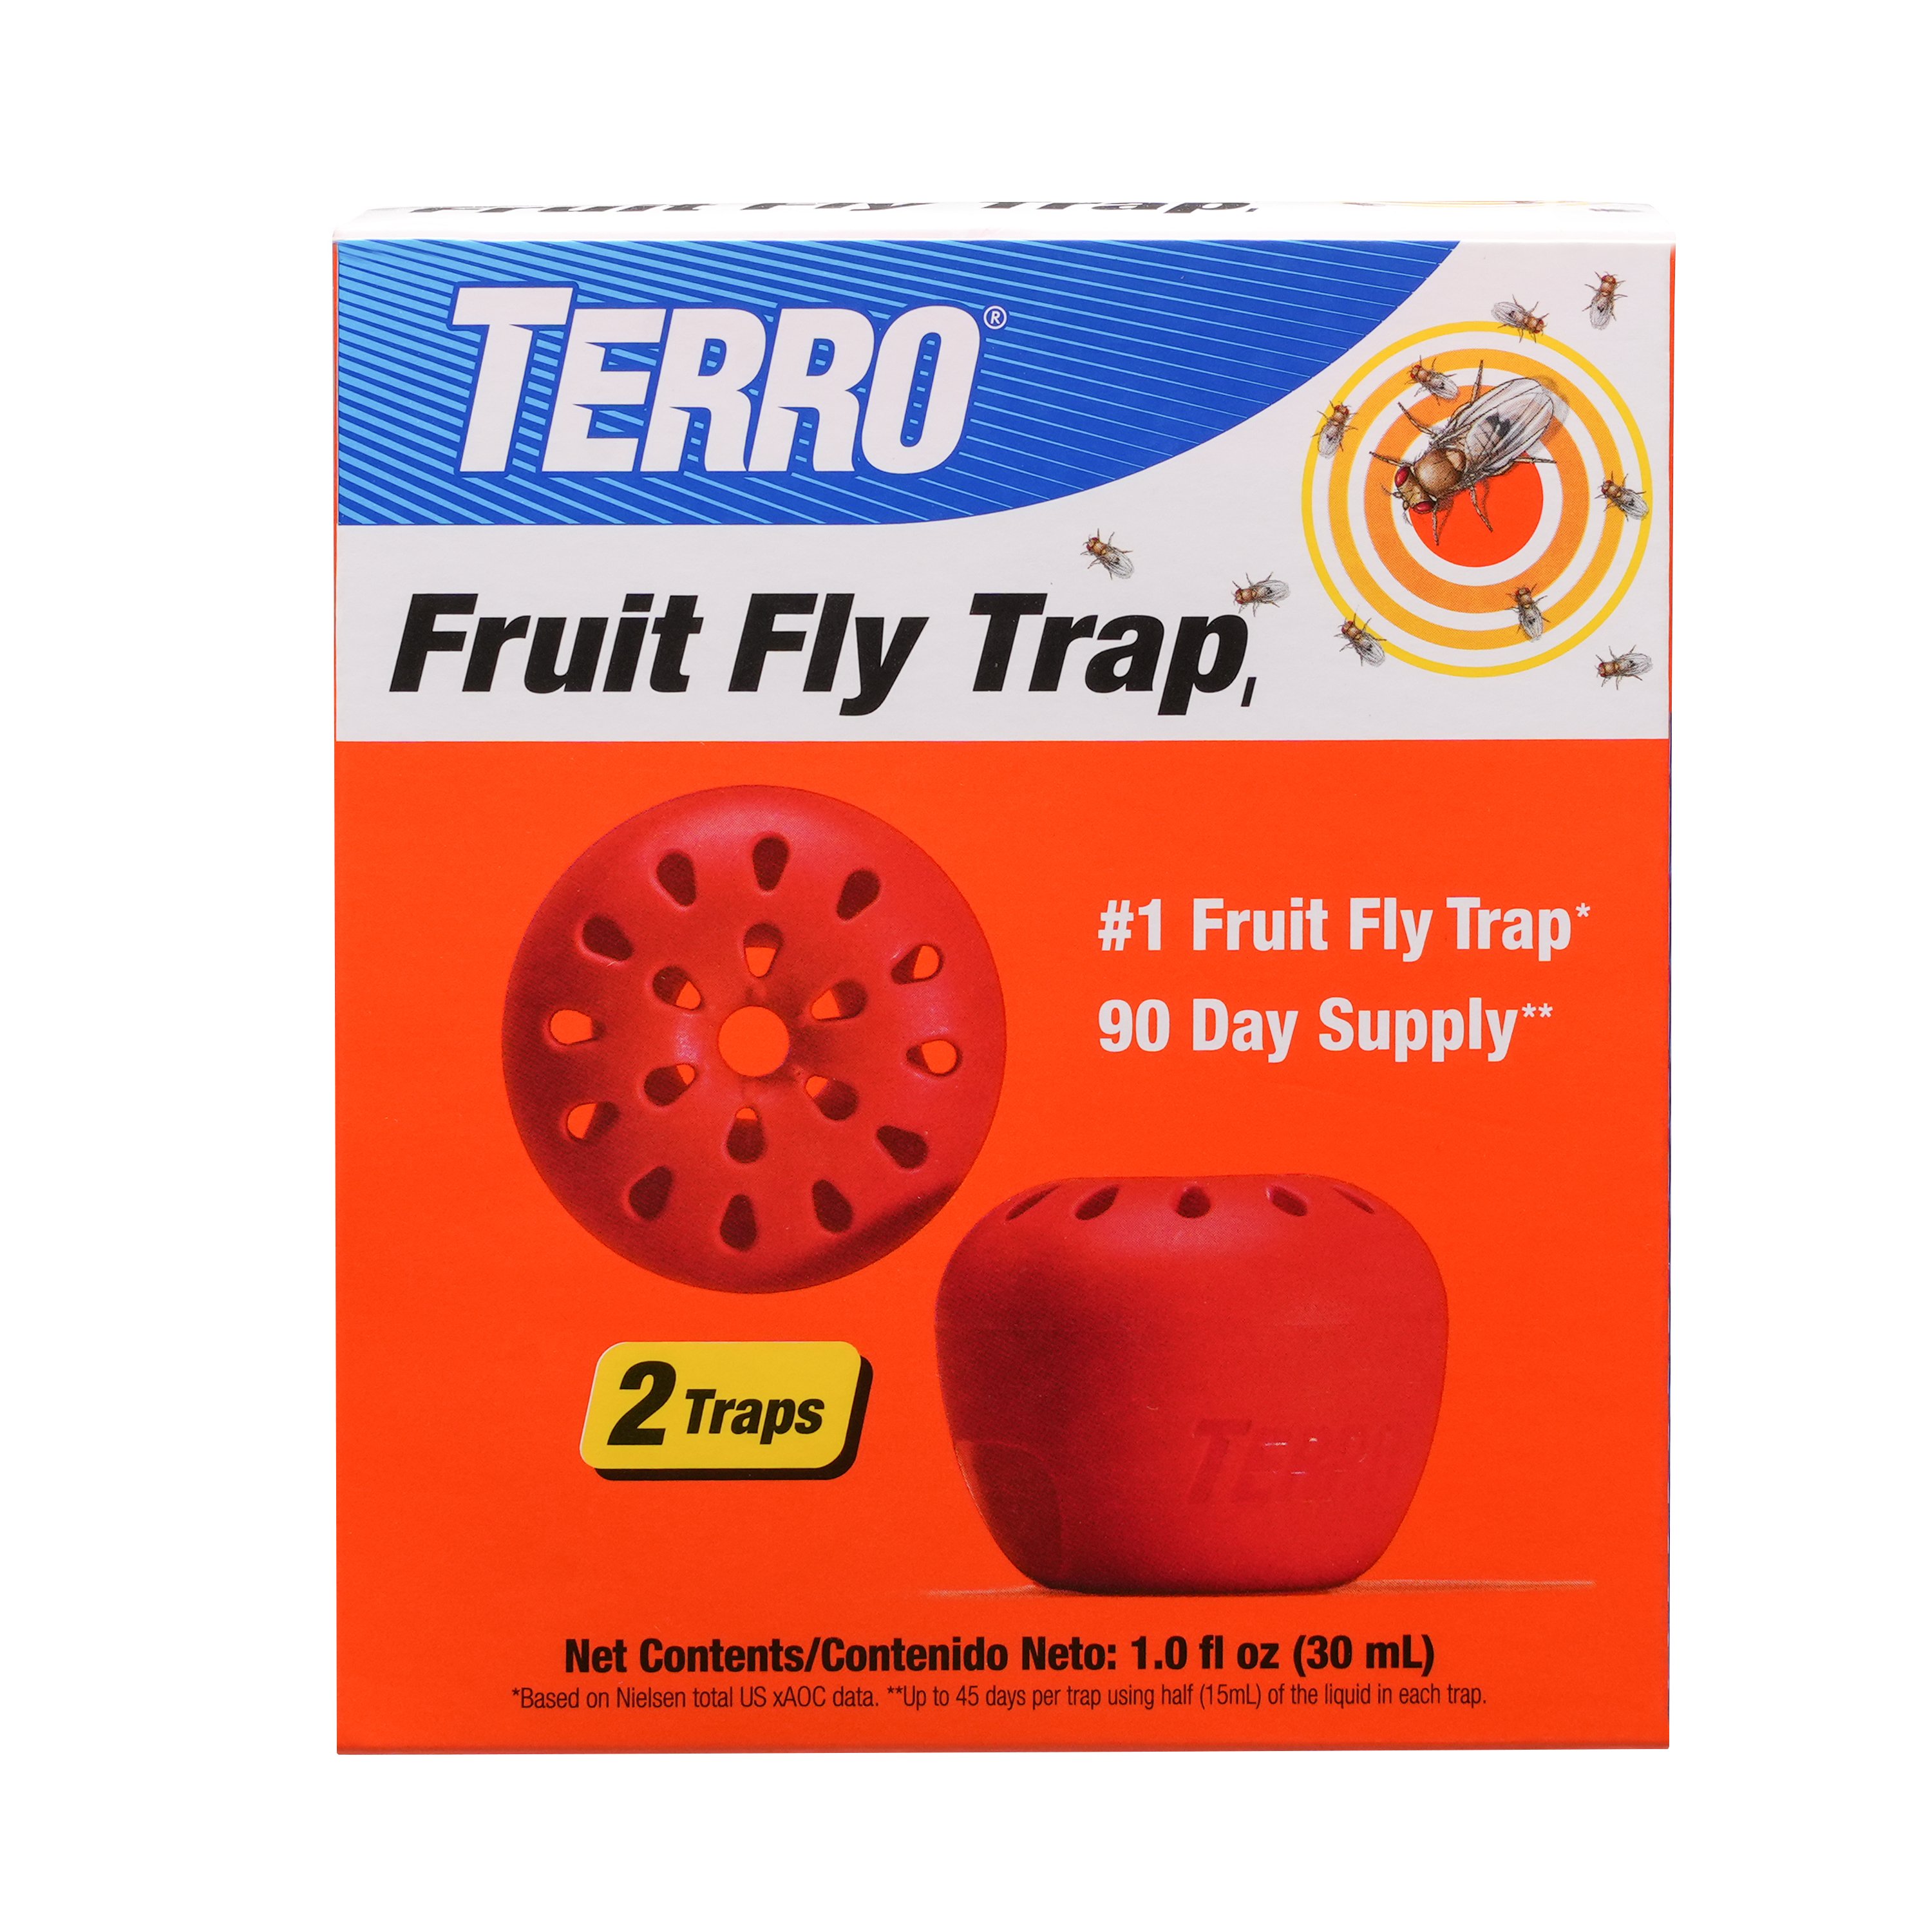 Rescue Fruit Fly Trap - 2 Pack